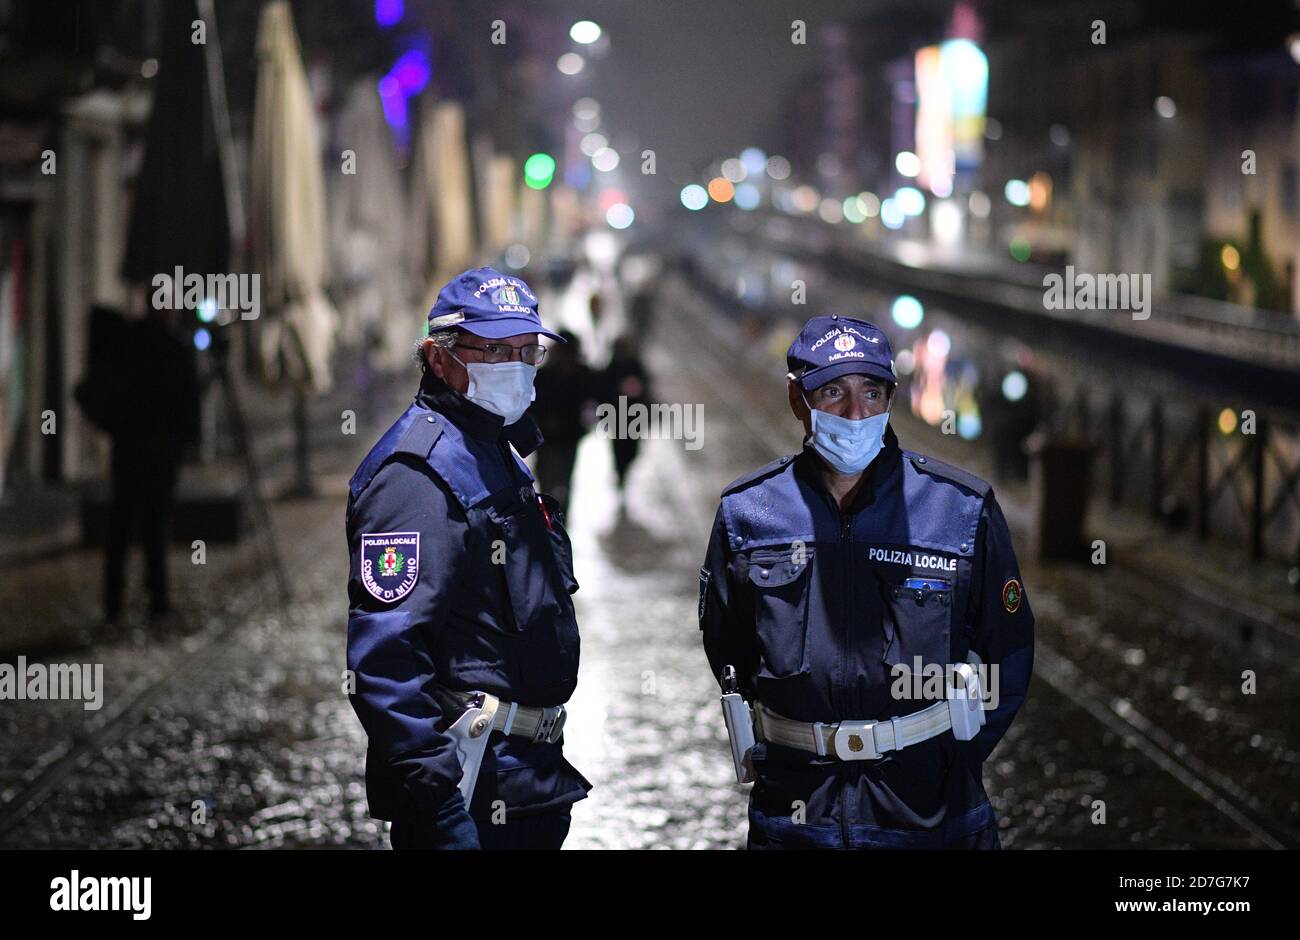 Milan, Italy. 22nd Oct, 2020. Police officers patrol a street amid a spike in new coronavirus infections in Milan, Italy, Oct. 22, 2020. Over 21.7 million Italians, making up over one-third of the country's population, have been placed under curfew amid a spike in new coronavirus infections, which numbered 13,860 on Thursday, officials said. Credit: Daniele Mascolo/Xinhua/Alamy Live News Stock Photo